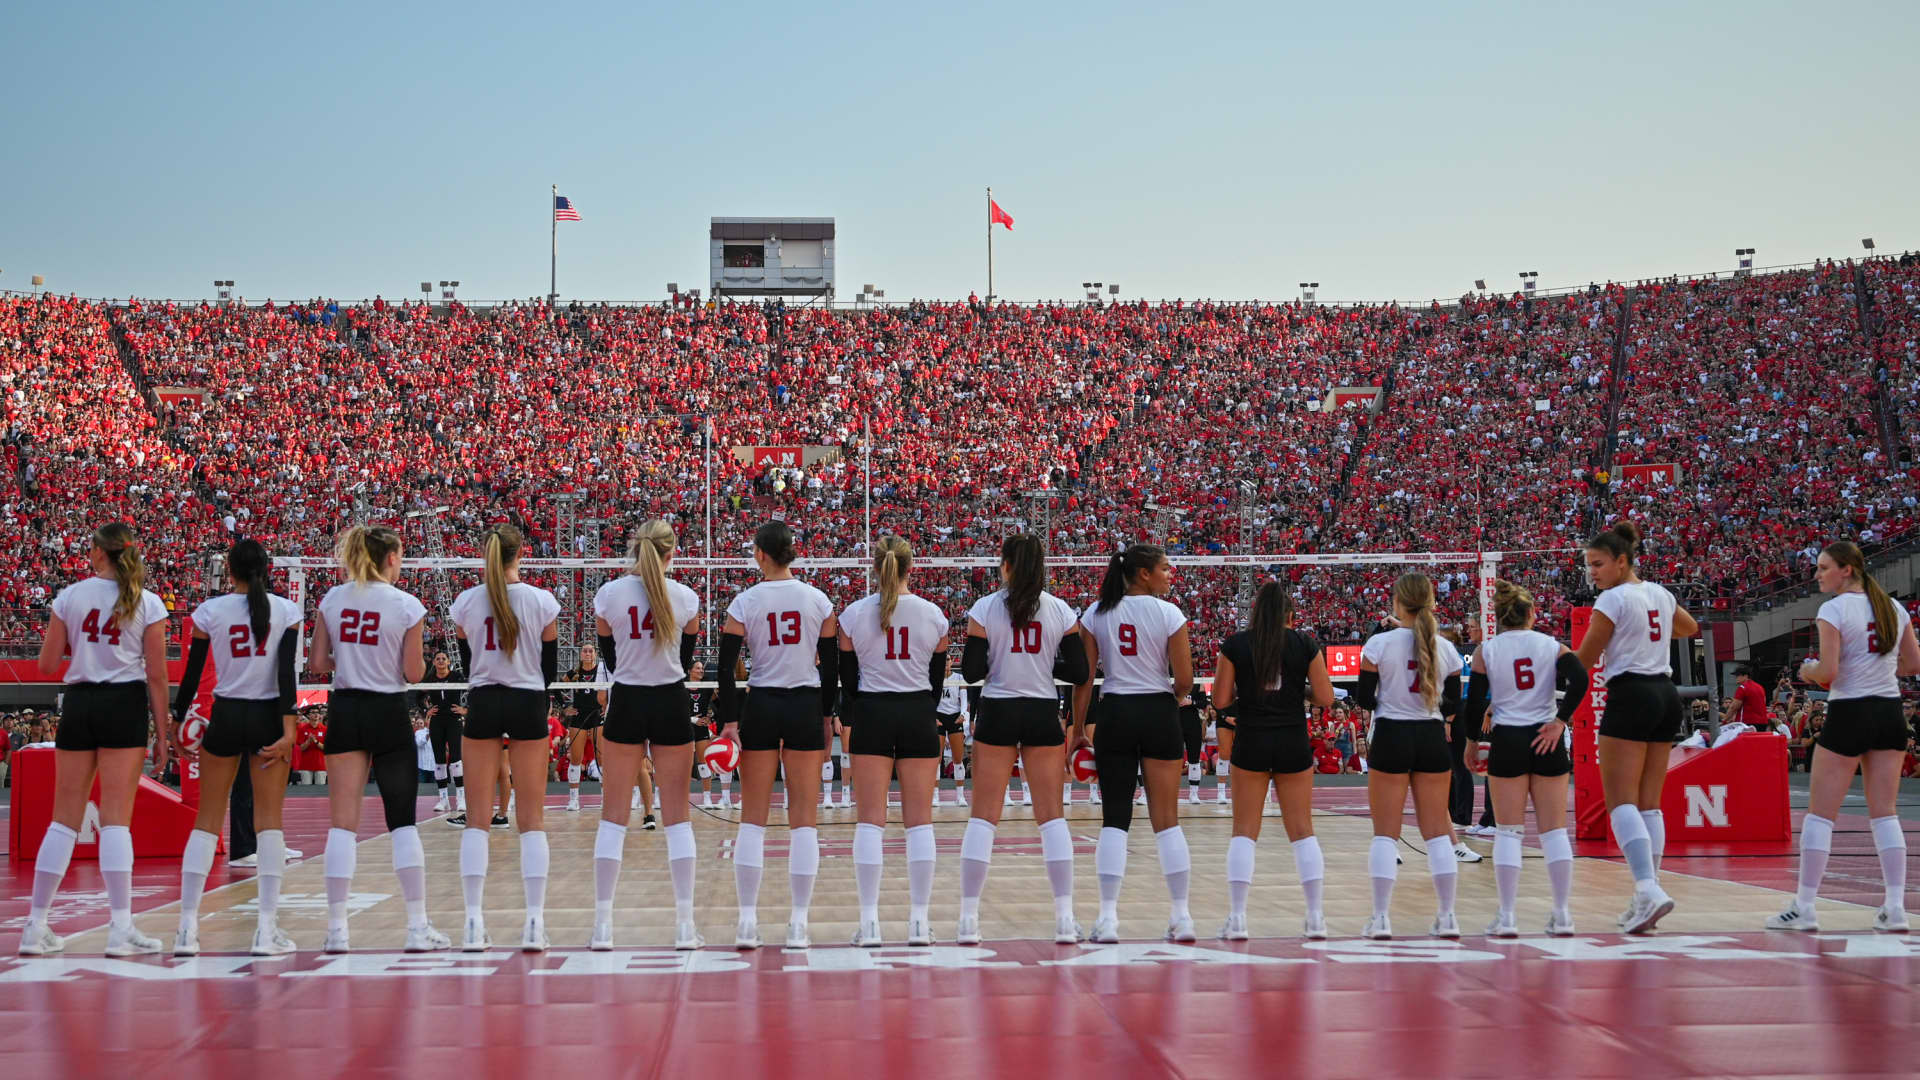 The Nebraska Cornhuskers stand on the court during introductions before the match against the Omaha Mavericks at Memorial Stadium on August 30, 2023 in Lincoln, Nebraska.